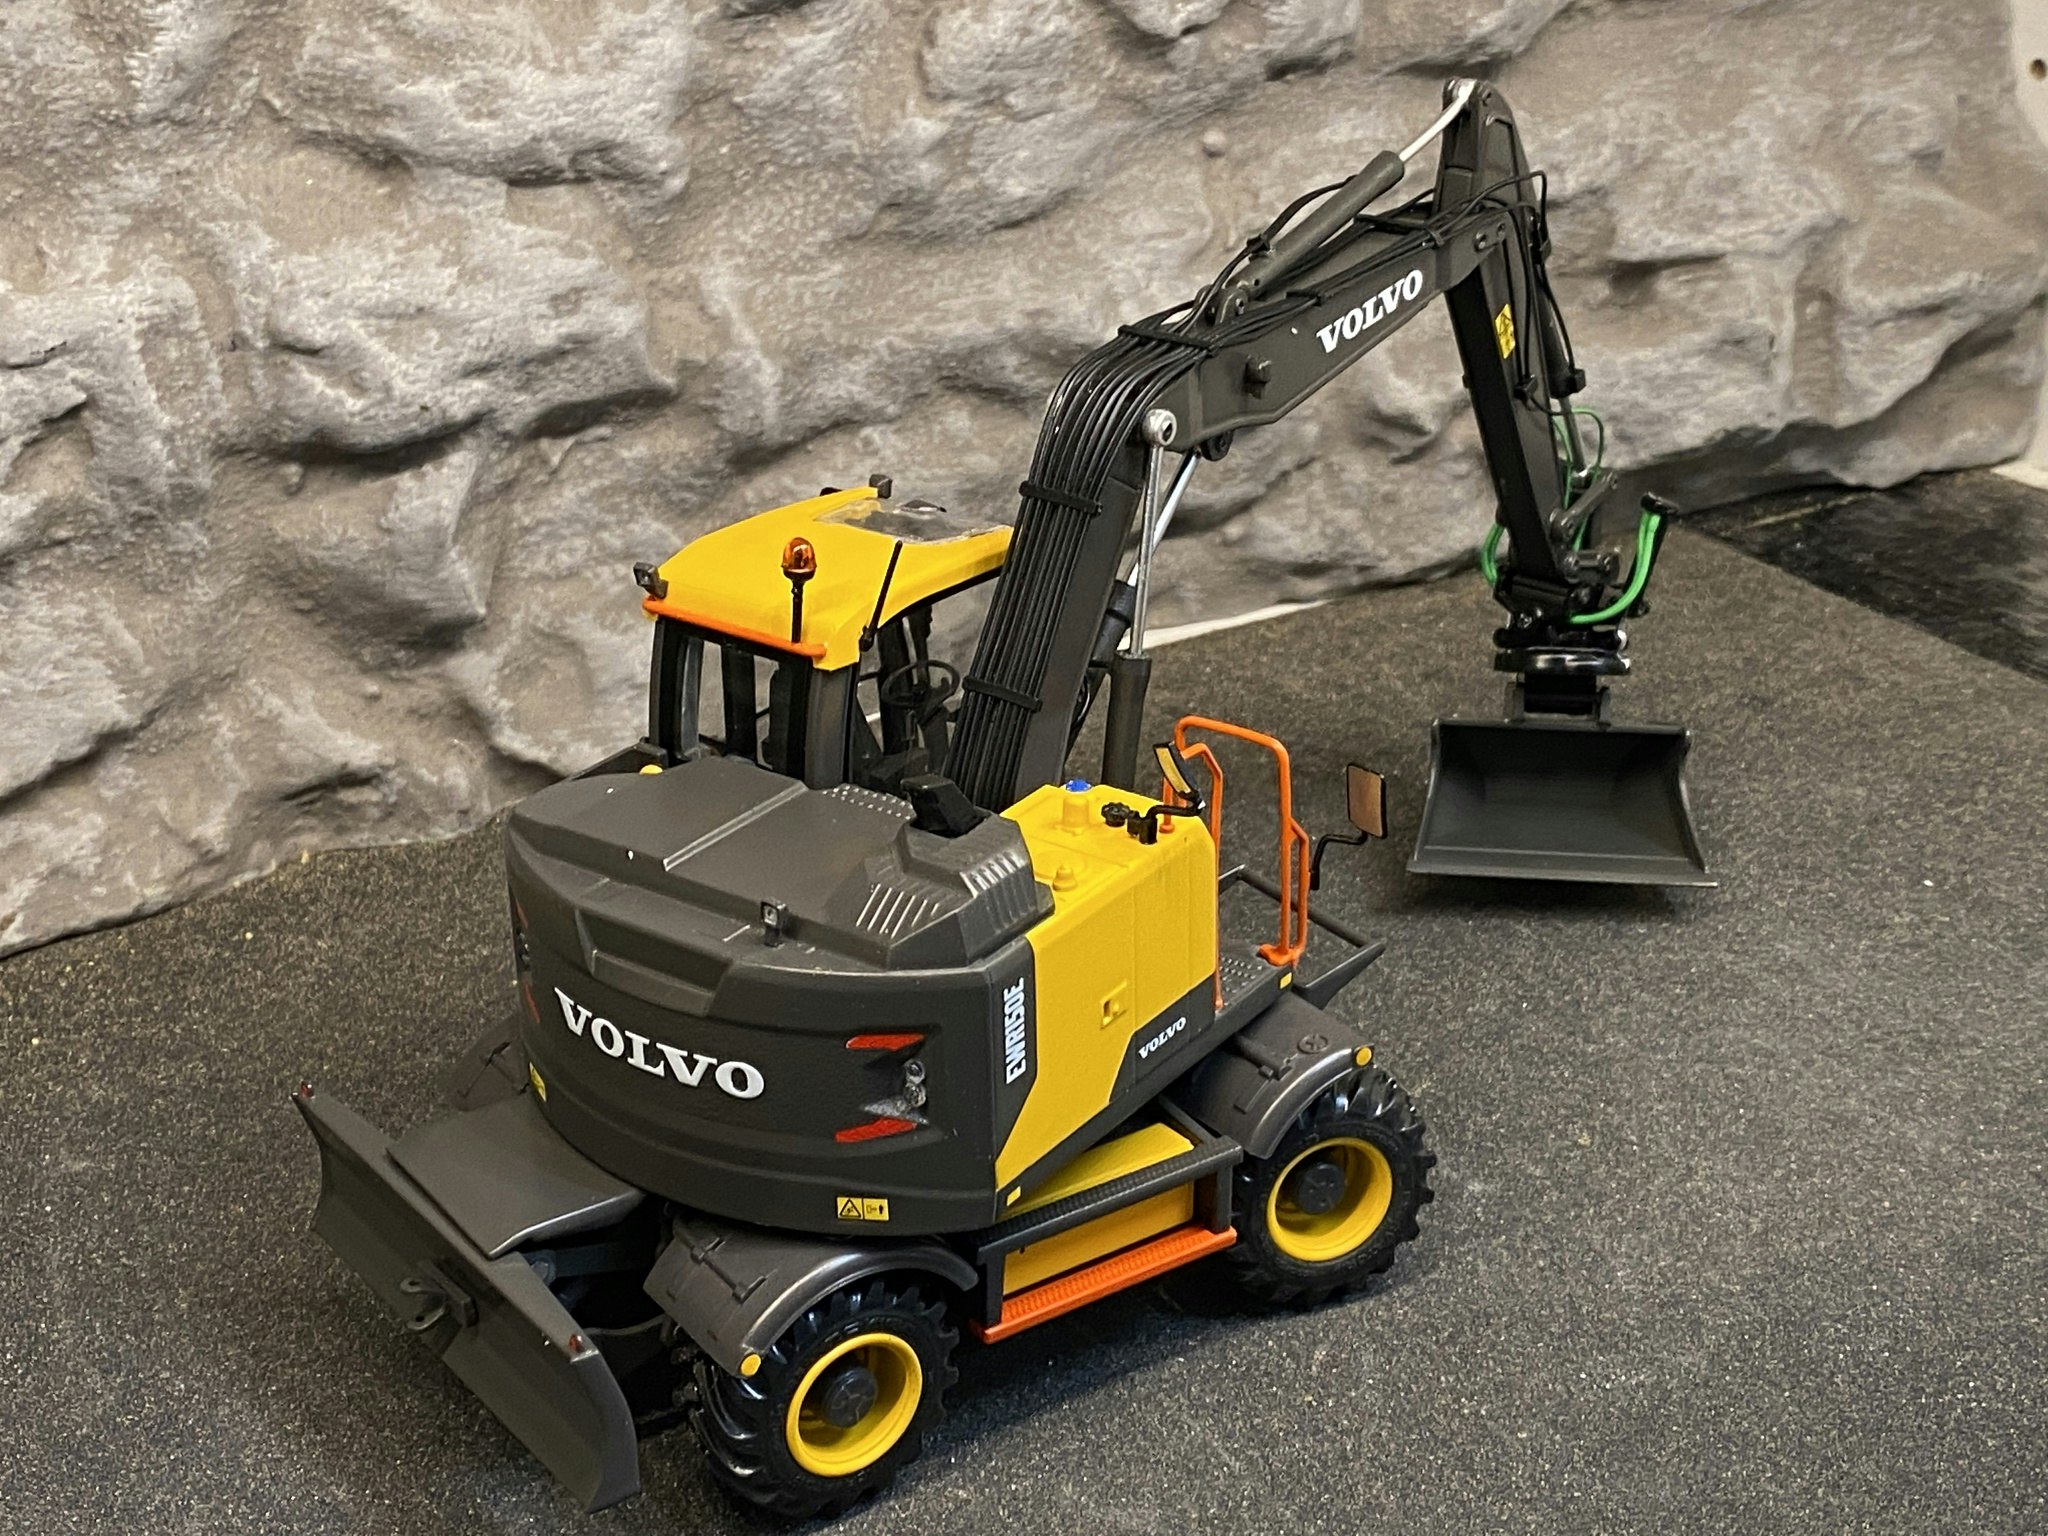 Scale 1/32 Volvo EWR 150E Steelwrist Tiltrotator Excavator fr AT Collections